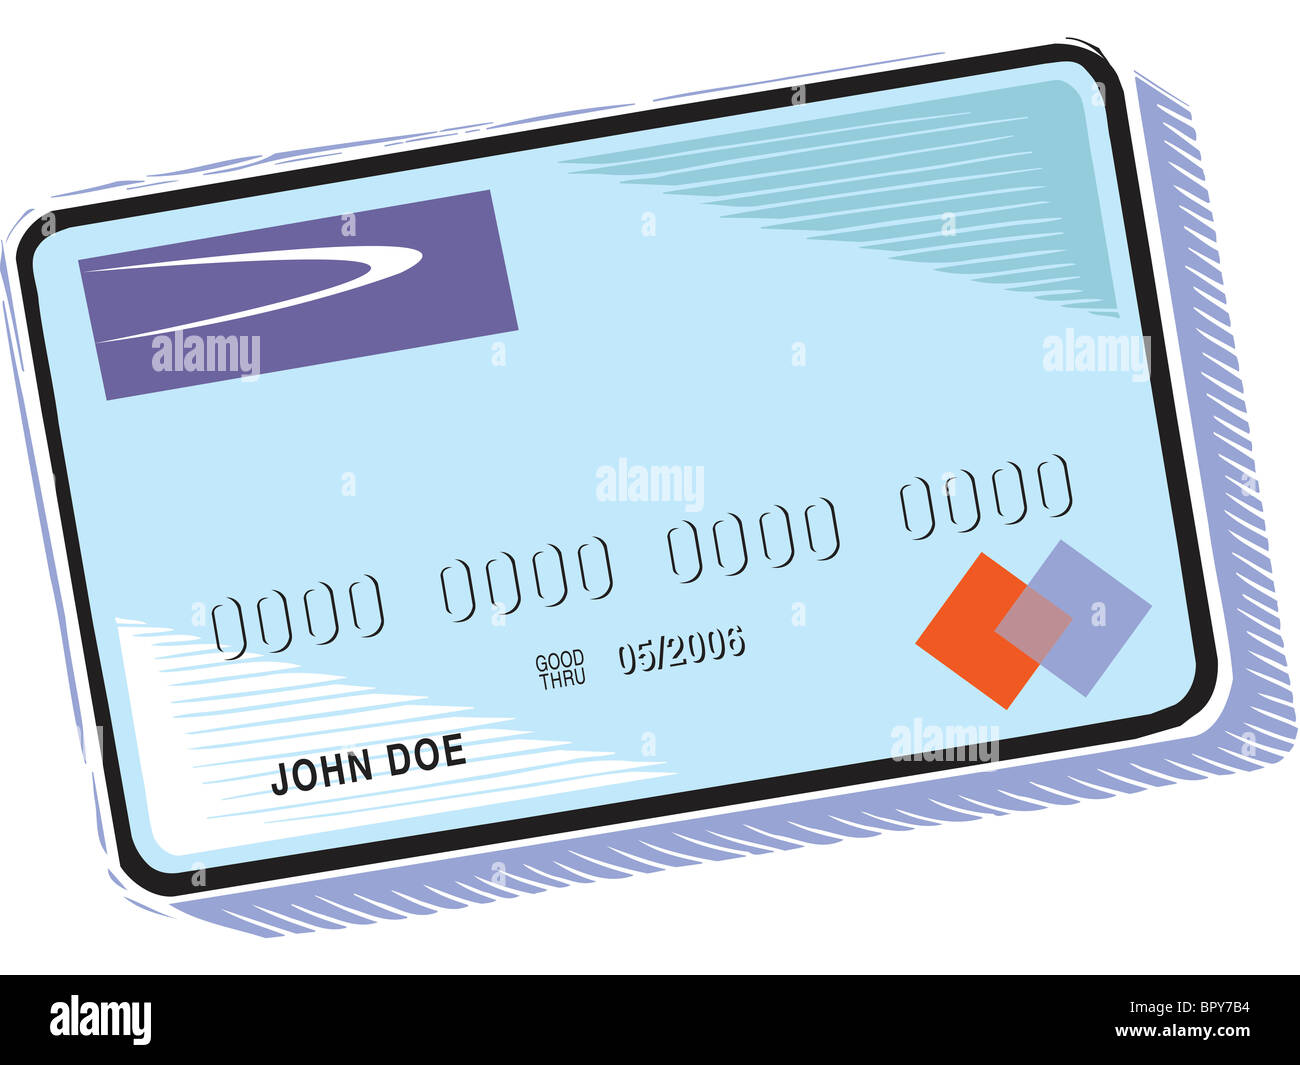 Illustration of a credit card Stock Photo